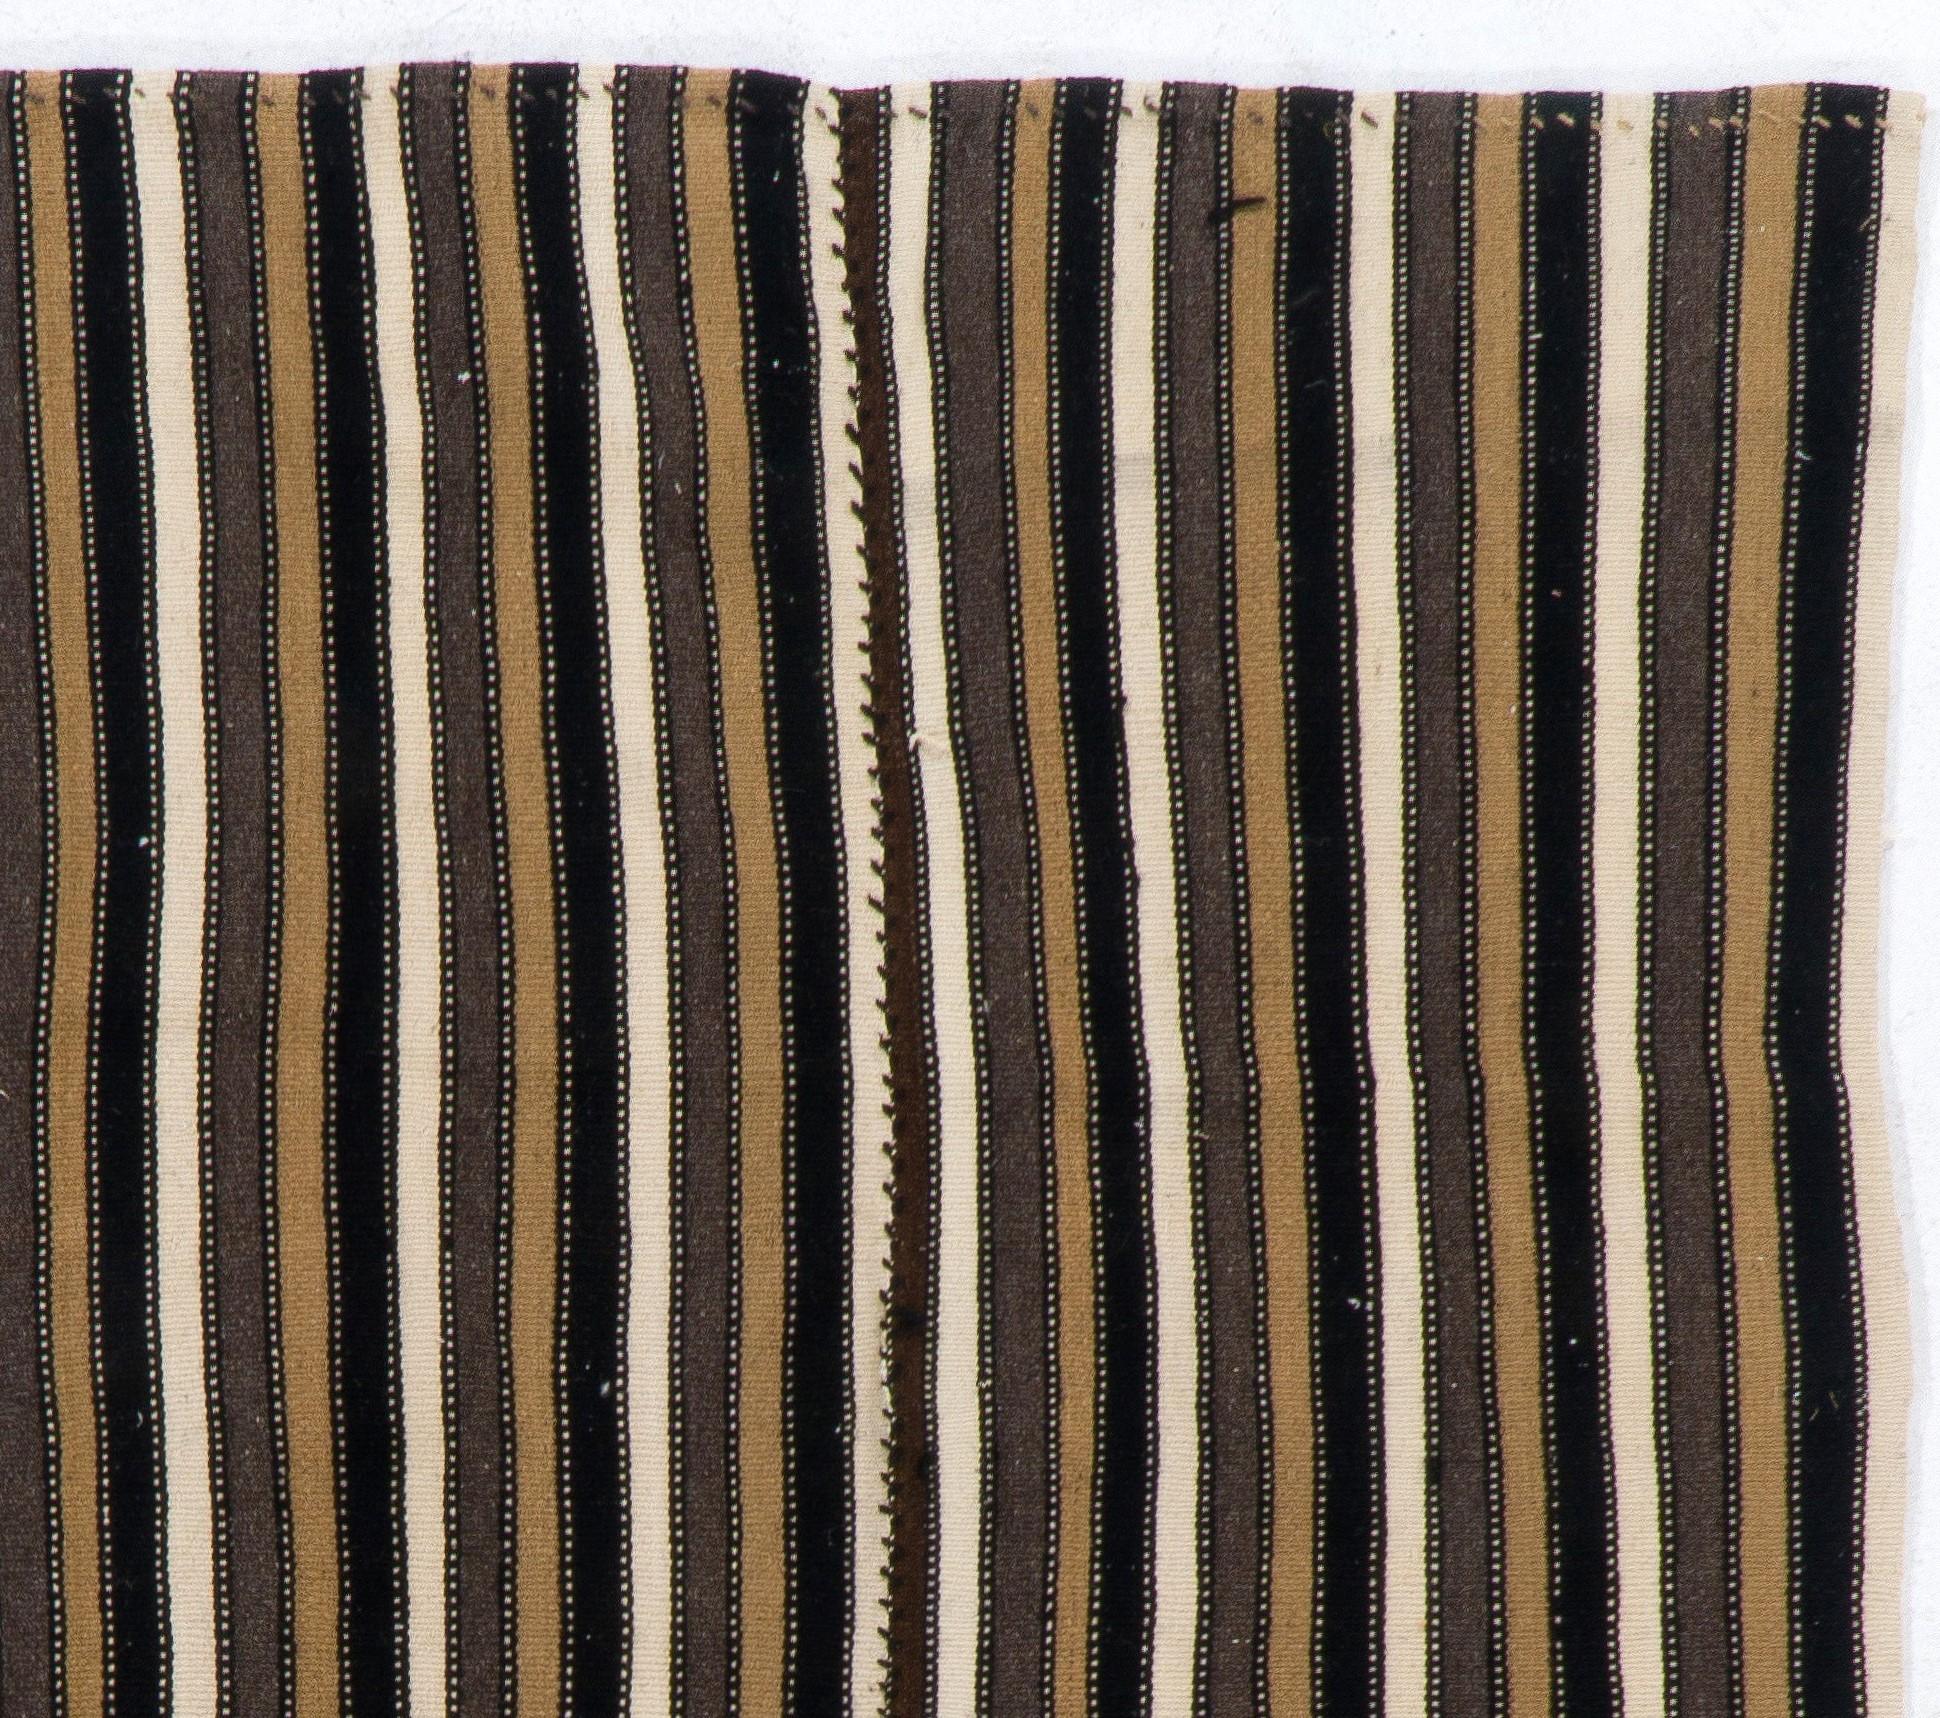 Hand-Knotted 5.6x8 Ft Hand-Woven Striped Vintage Kilim. 100% Wool Flatweave Rug. Reversible